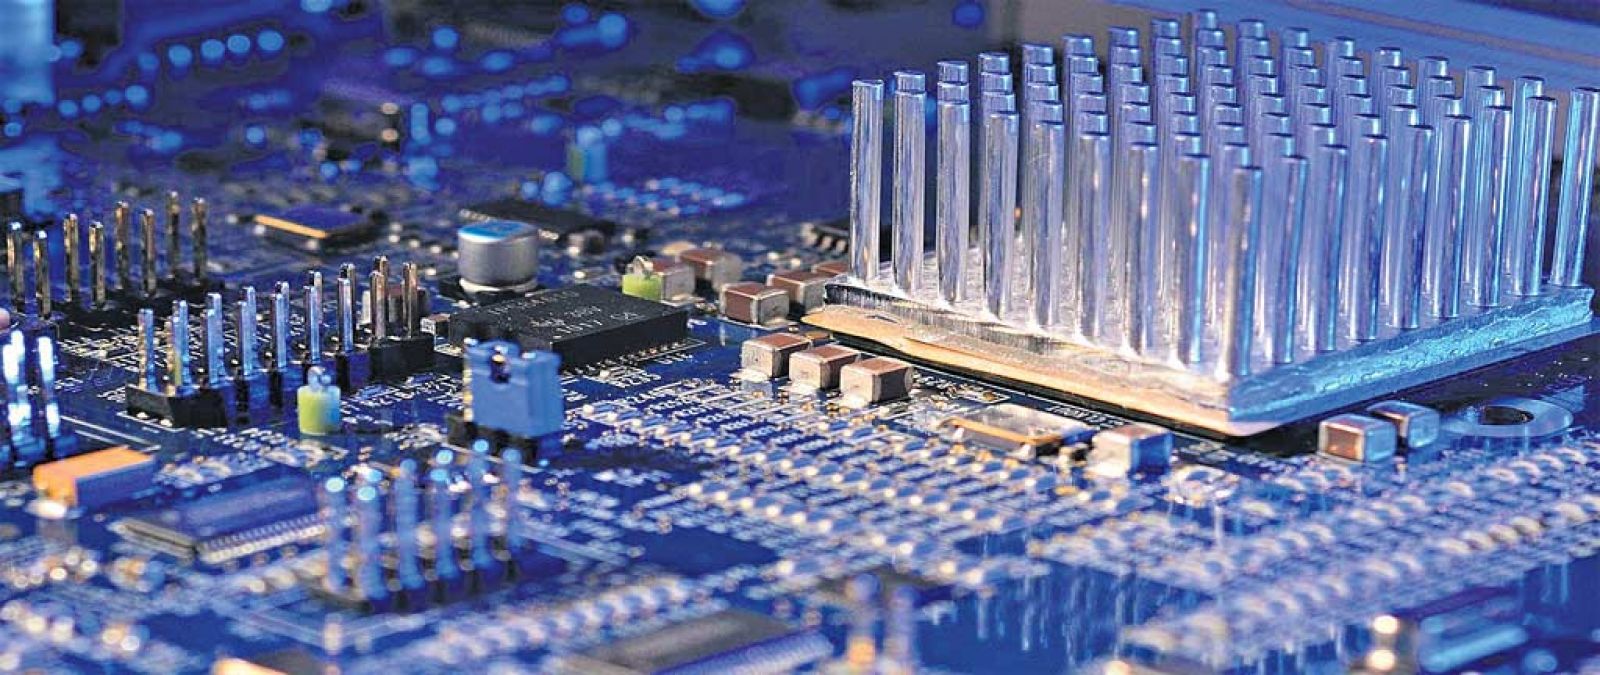 Government can make this announcement to boost electronics manufacturing sector